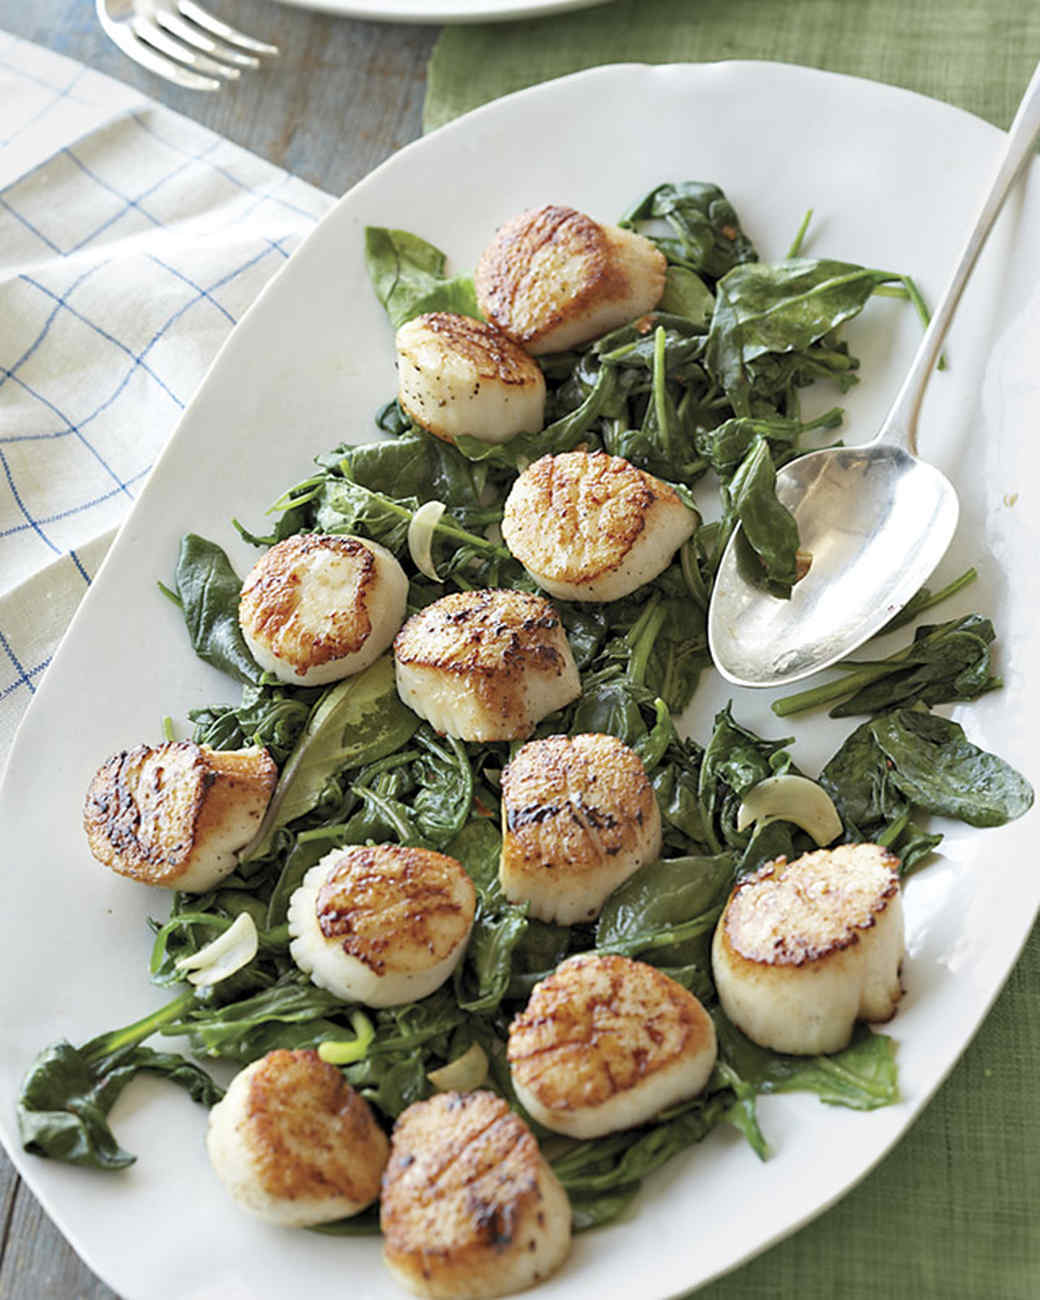 Scallop Recipes That'll Bring Seaside Flavors to Your Table